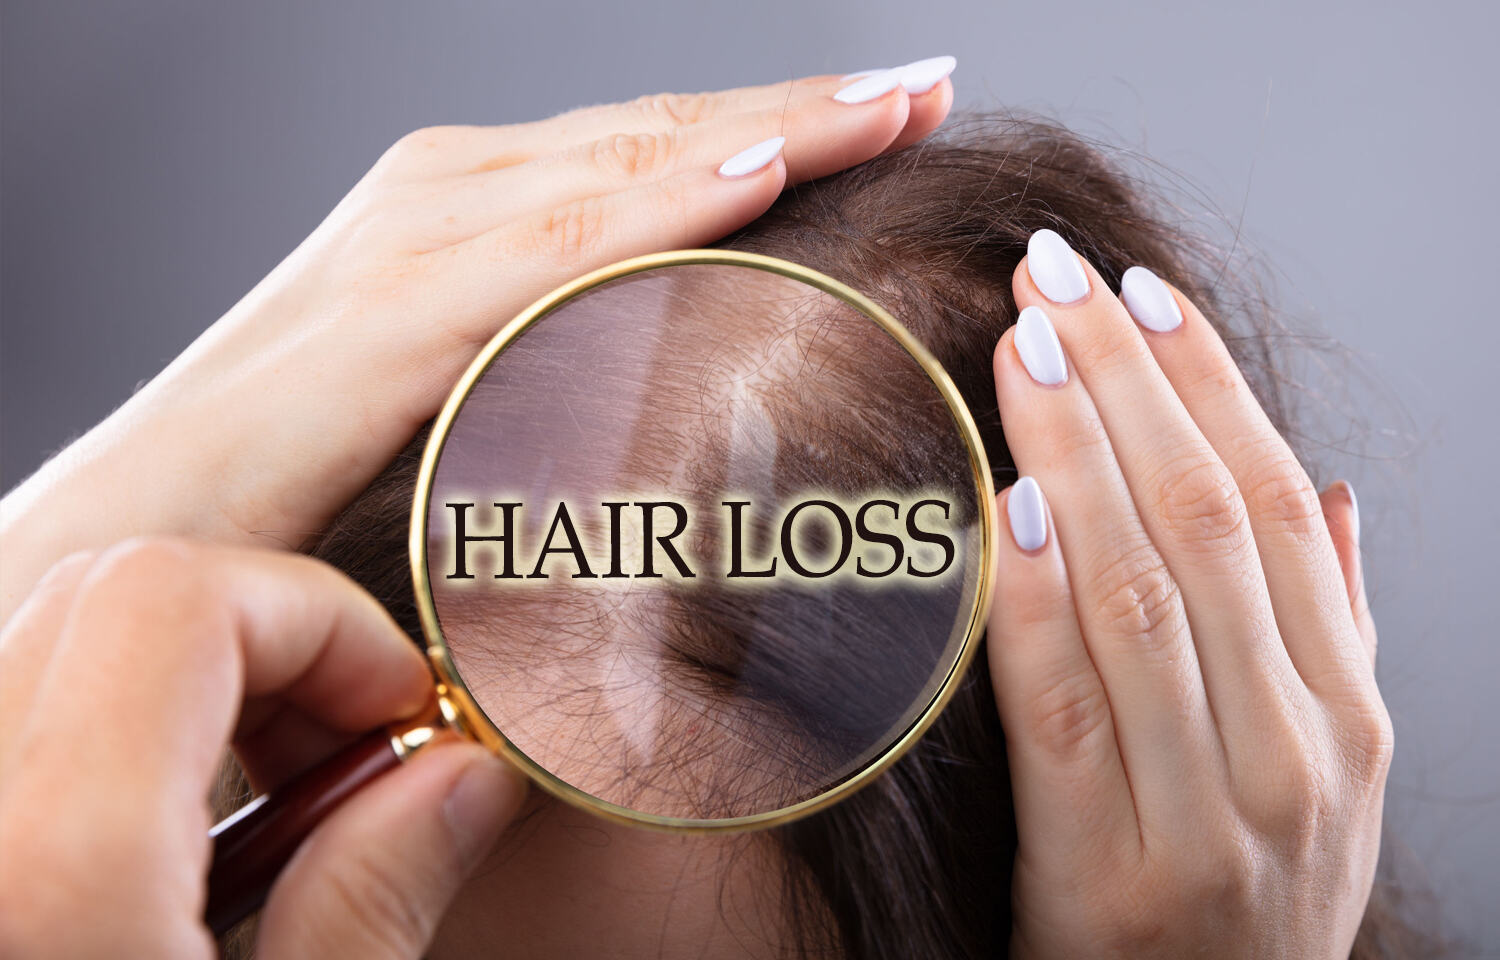 Hair loss frequent in acne patients treated with low dose isotretinoin vs  high dose